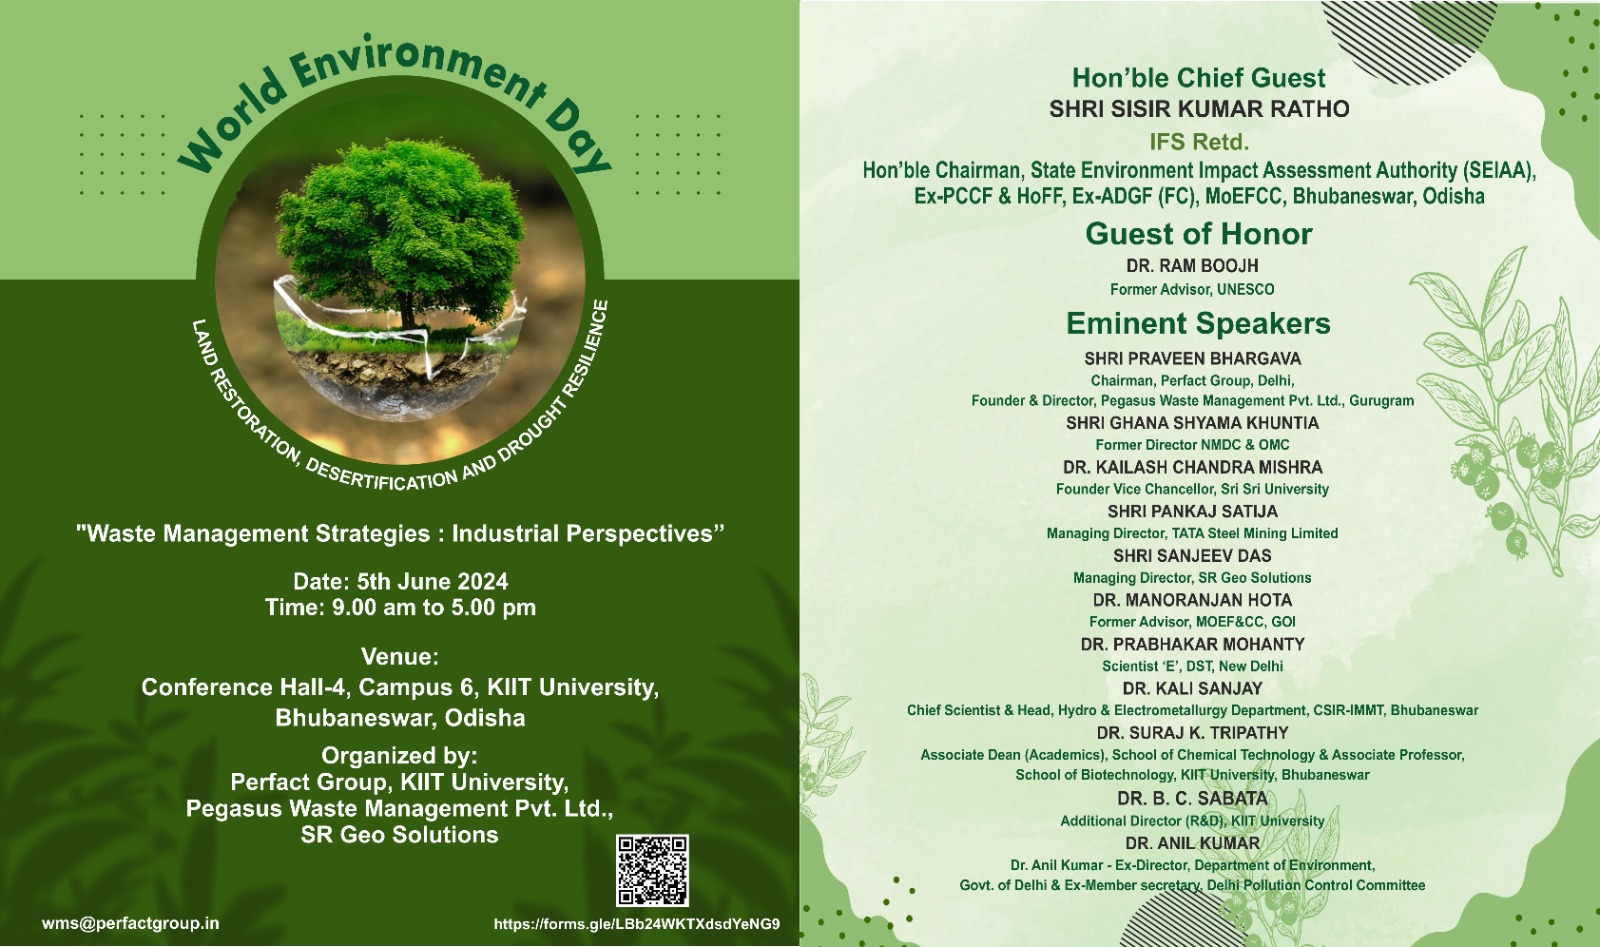 Join us in celebrating World Environment Day on June 5th, 2024, at KIIT University, Bhubaneswar! Dive into Waste Management Strategies and learn from industry experts about innovative solutions for #LandRestoration, #Desertification, and #DroughtResilience. Don't miss this insightful event organized by #PerfectGroup and #KIITUniversity.